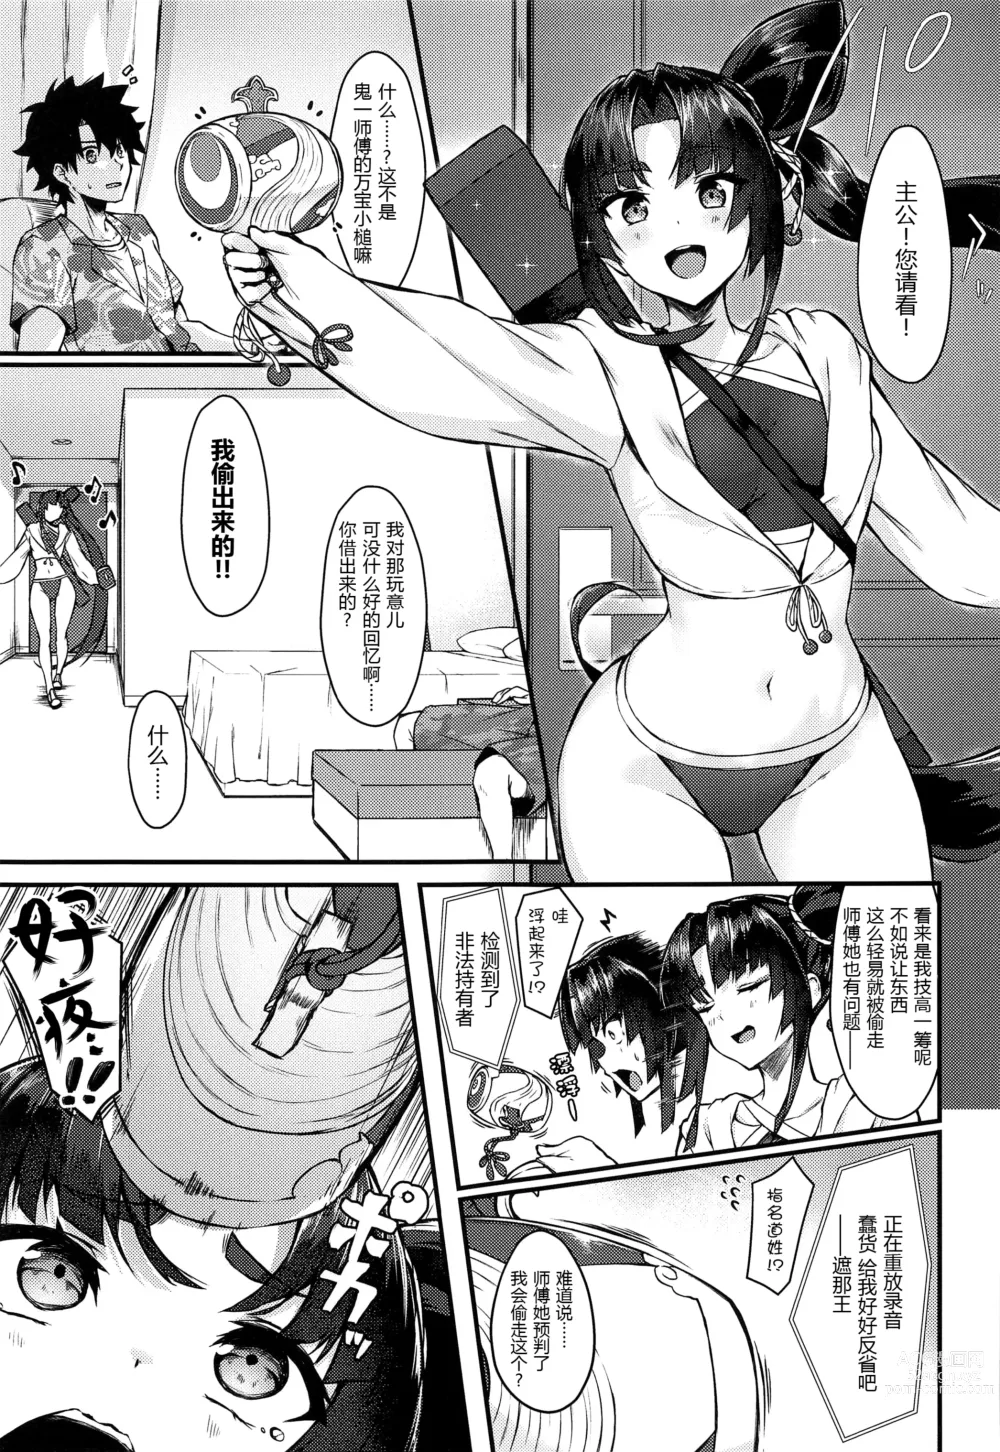 Page 3 of doujinshi Comparing the Ushis